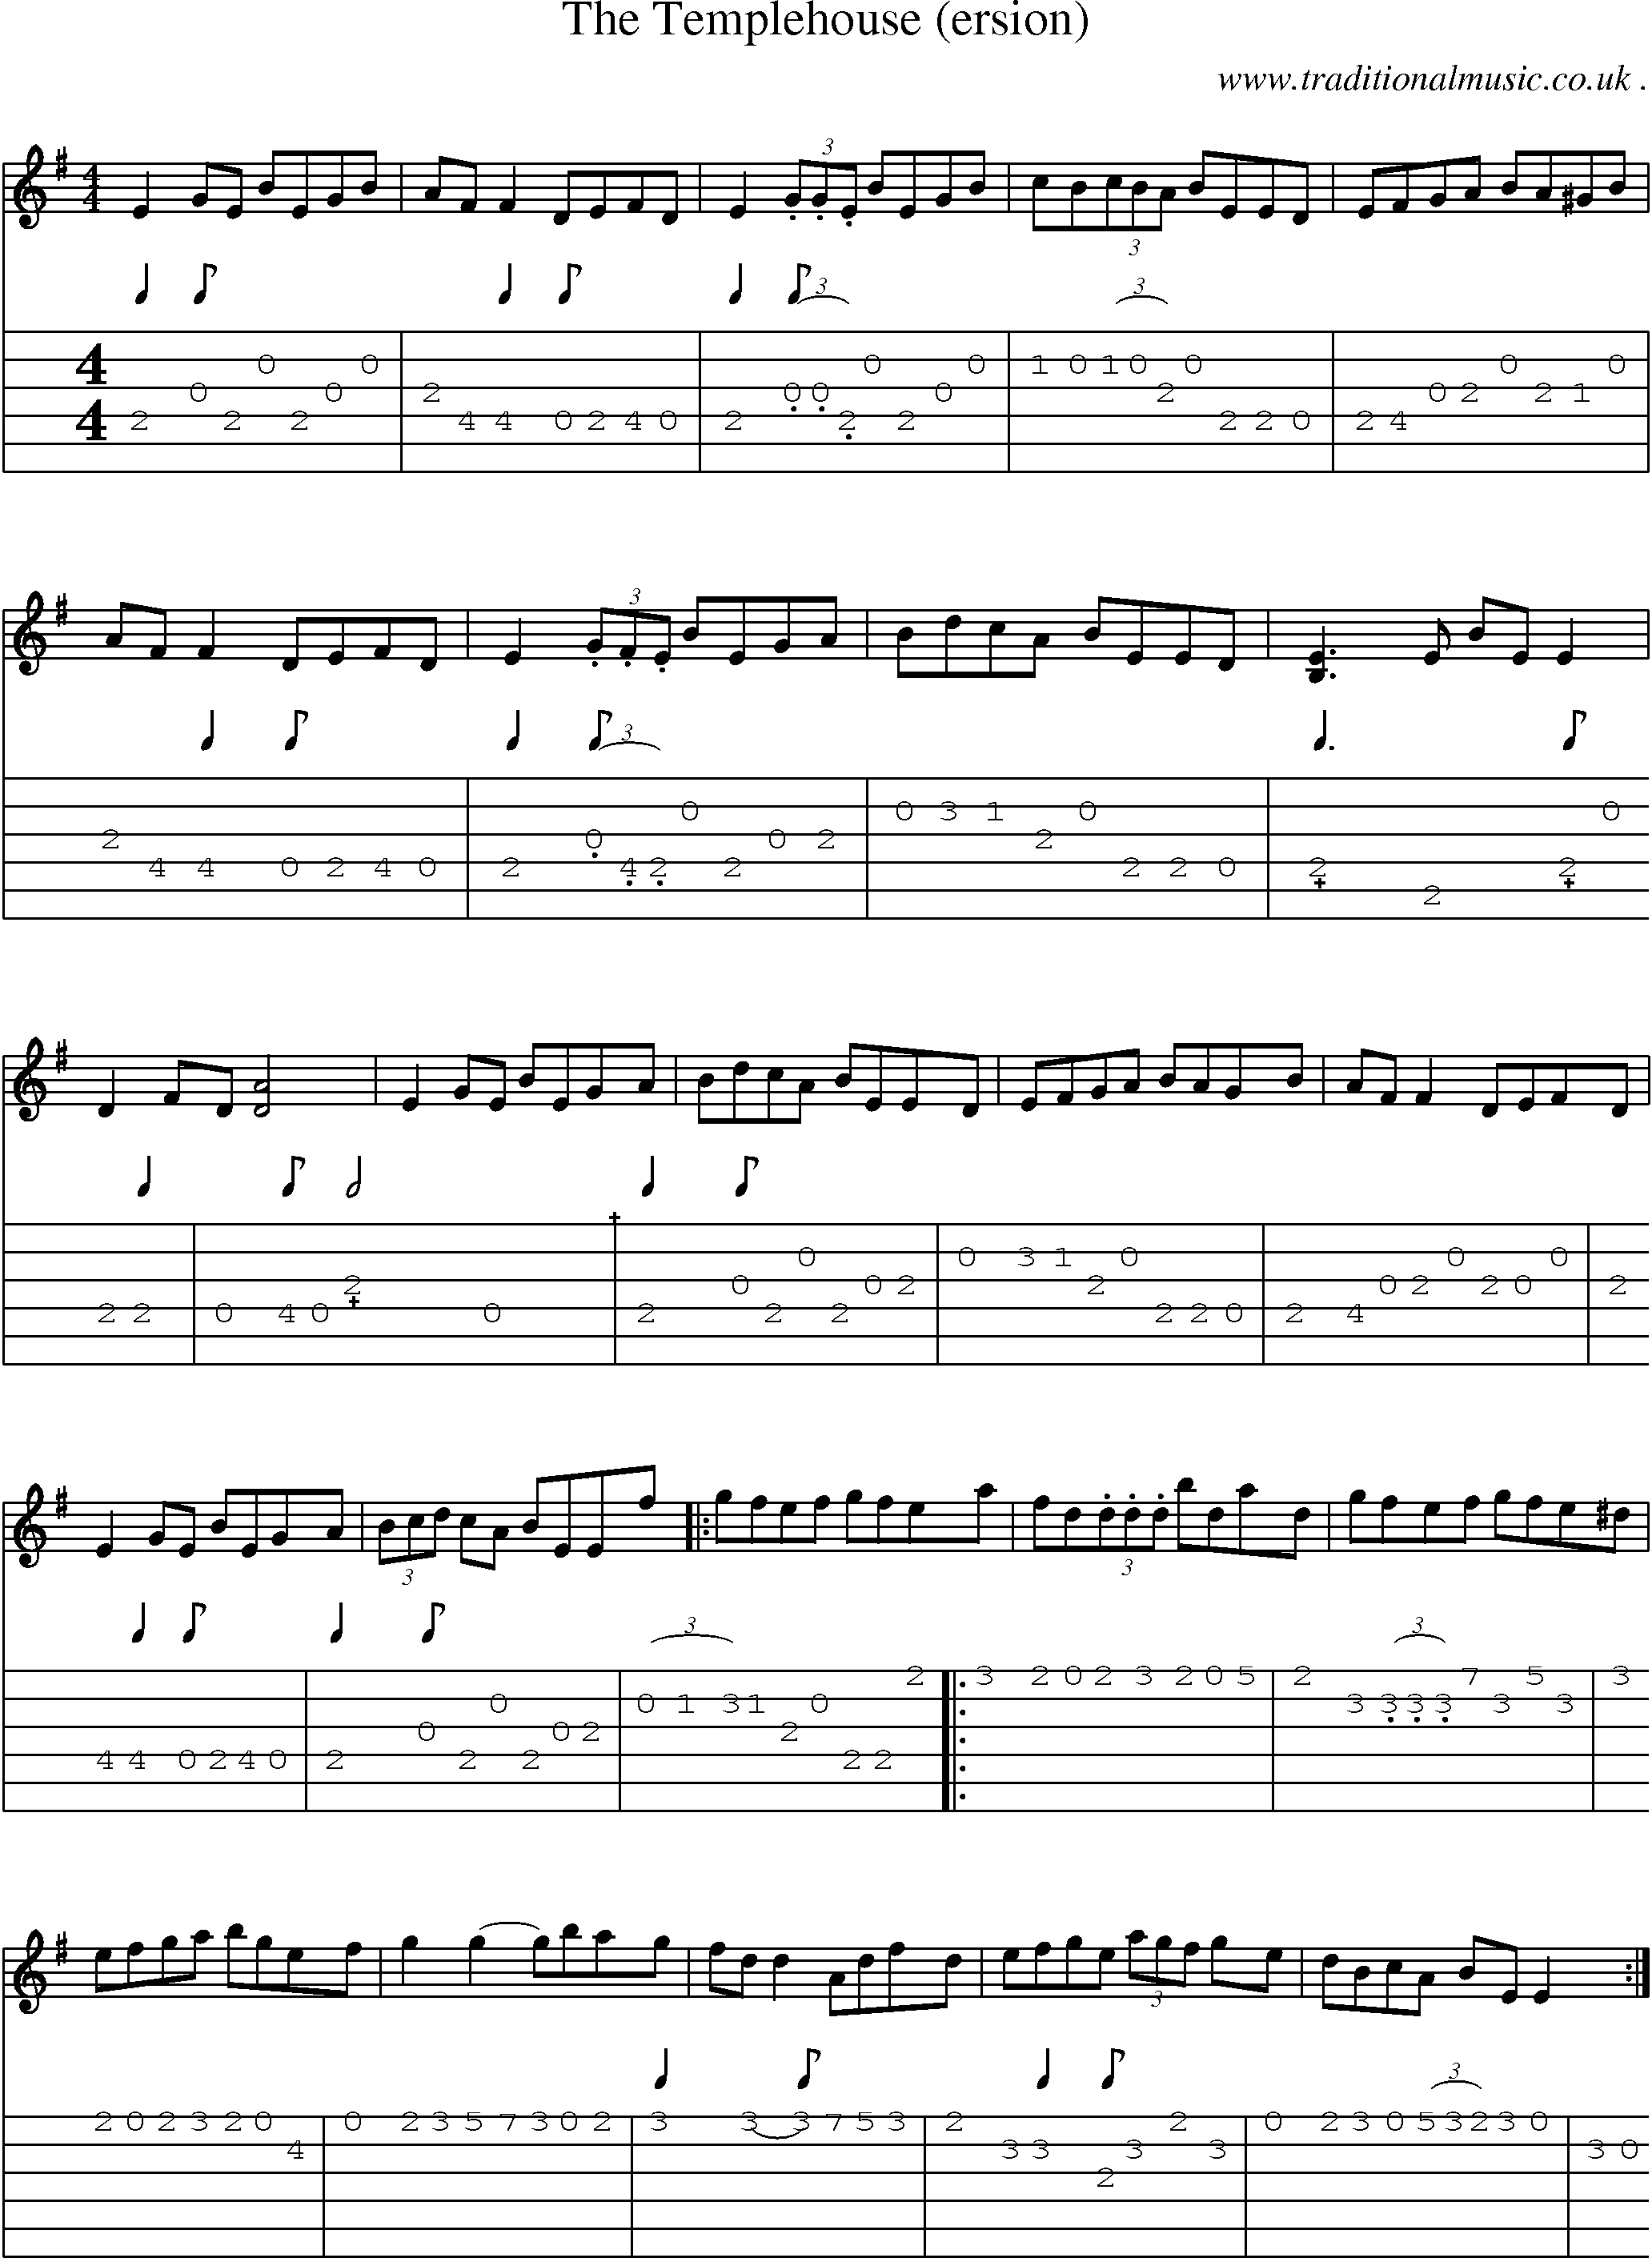 Sheet-Music and Guitar Tabs for The Templehouse (ersion)